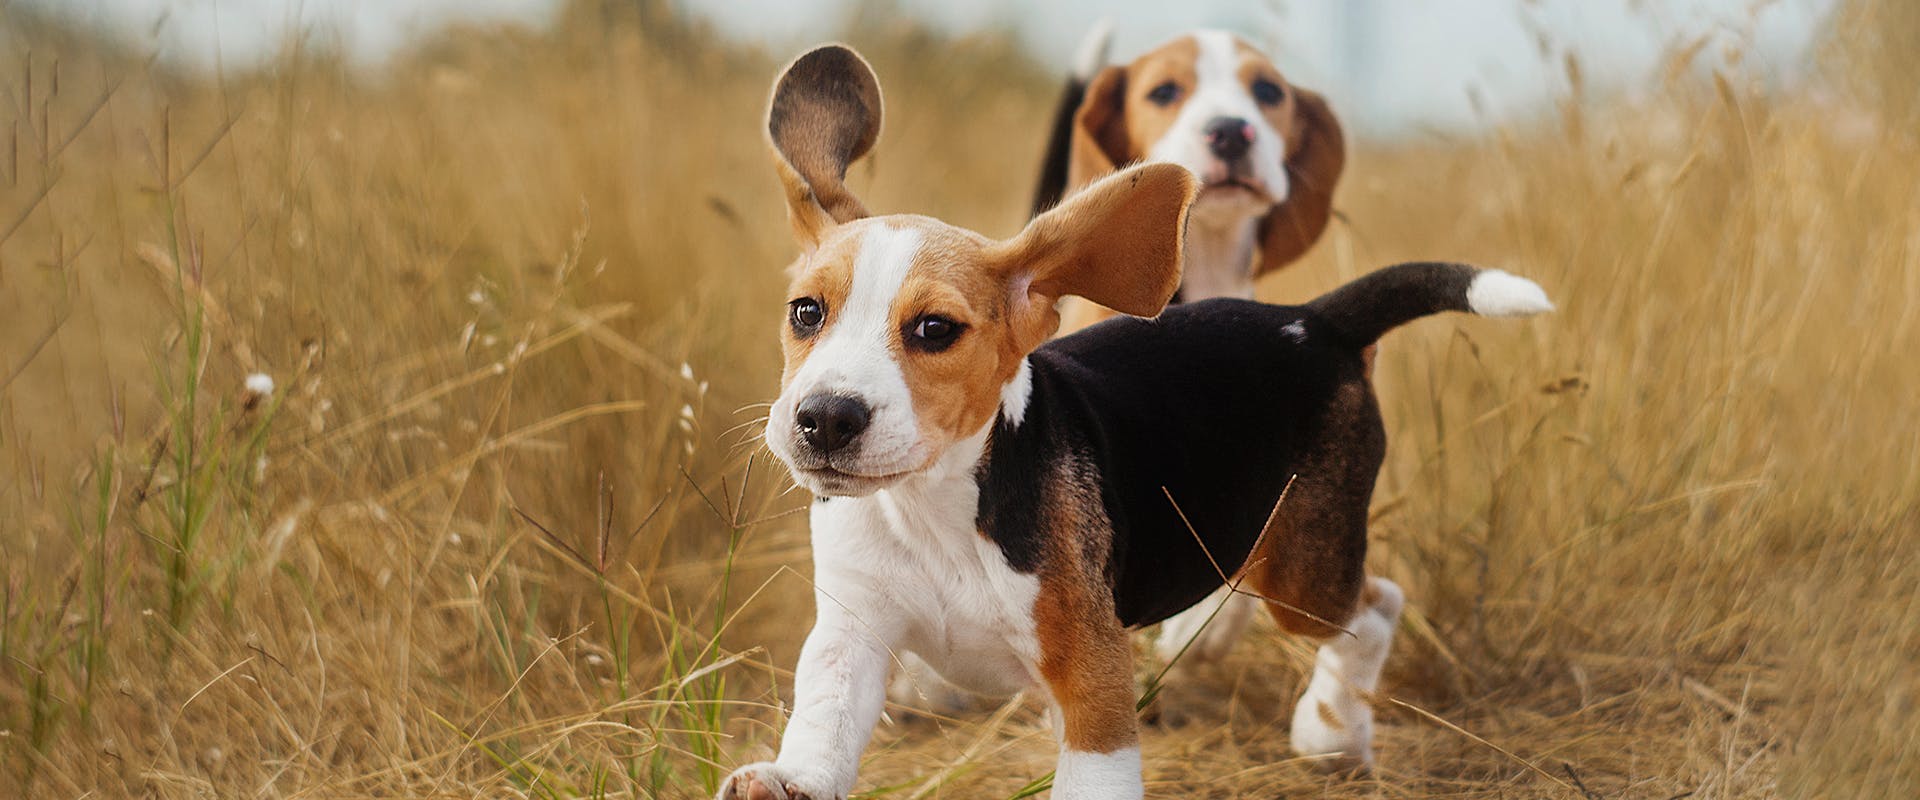 are beagles playful dogs